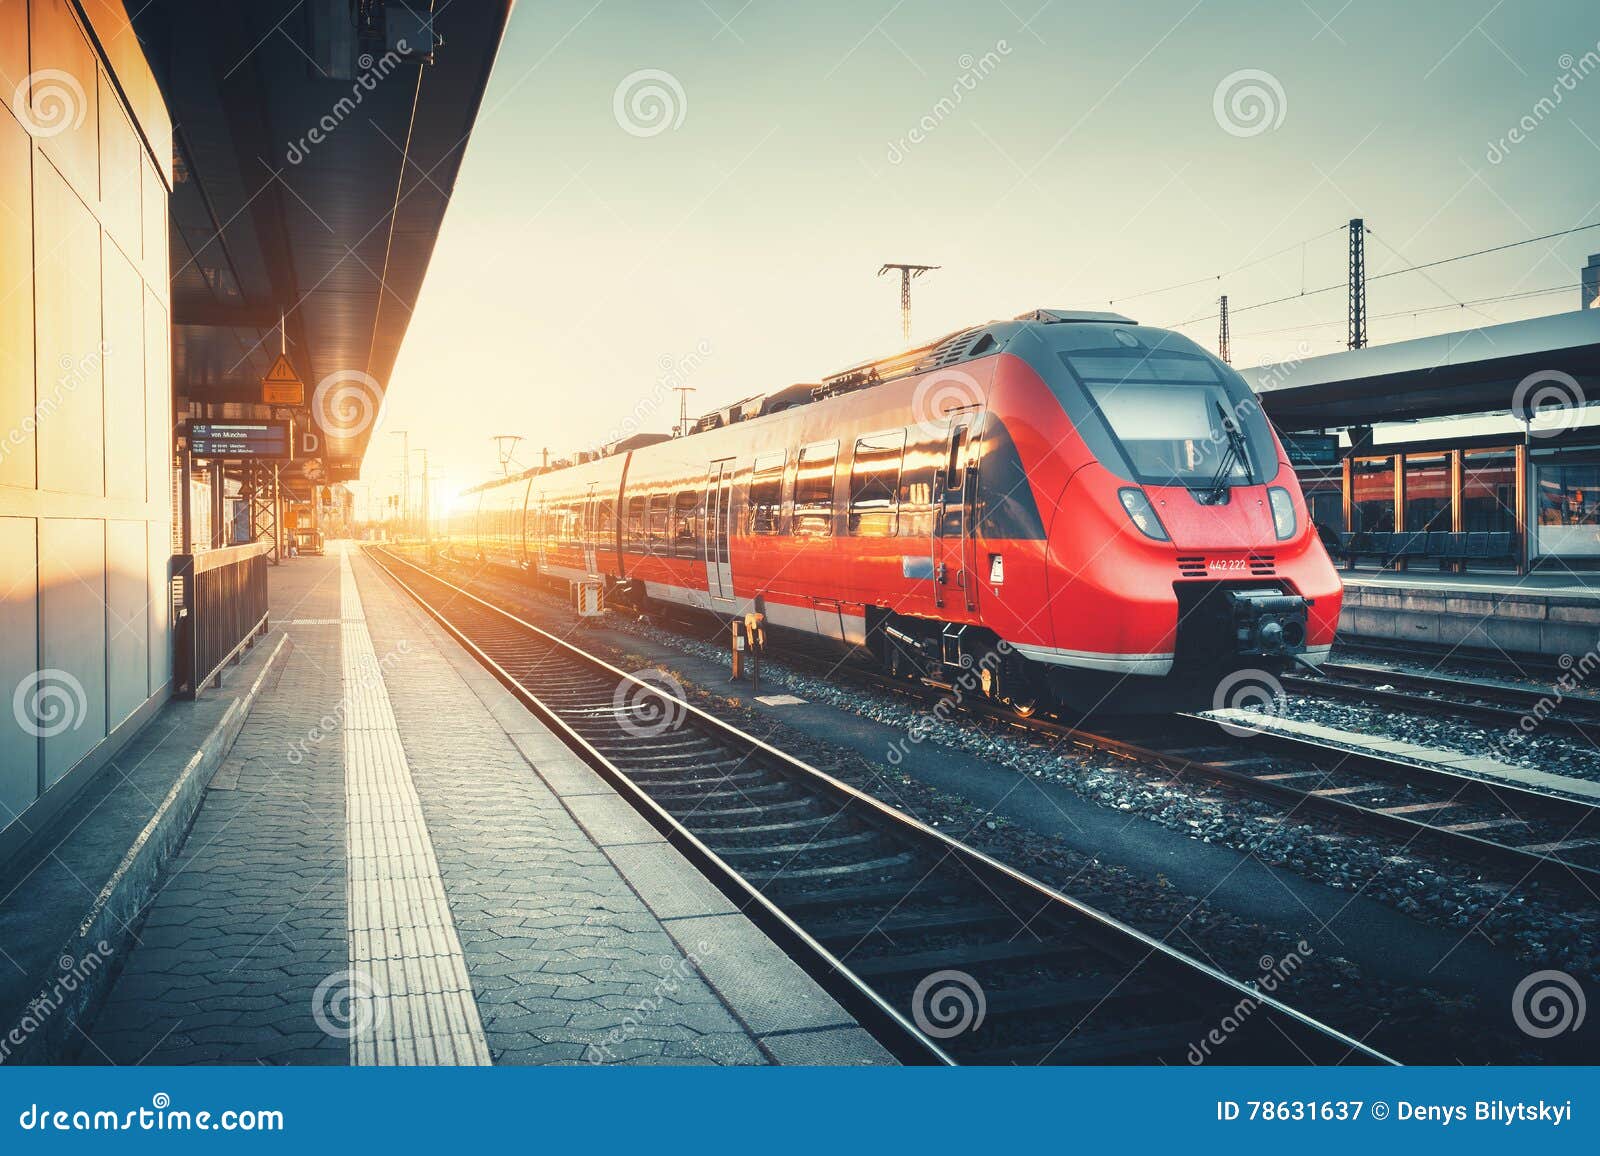 railway station with beautiful modern red commuter train at suns